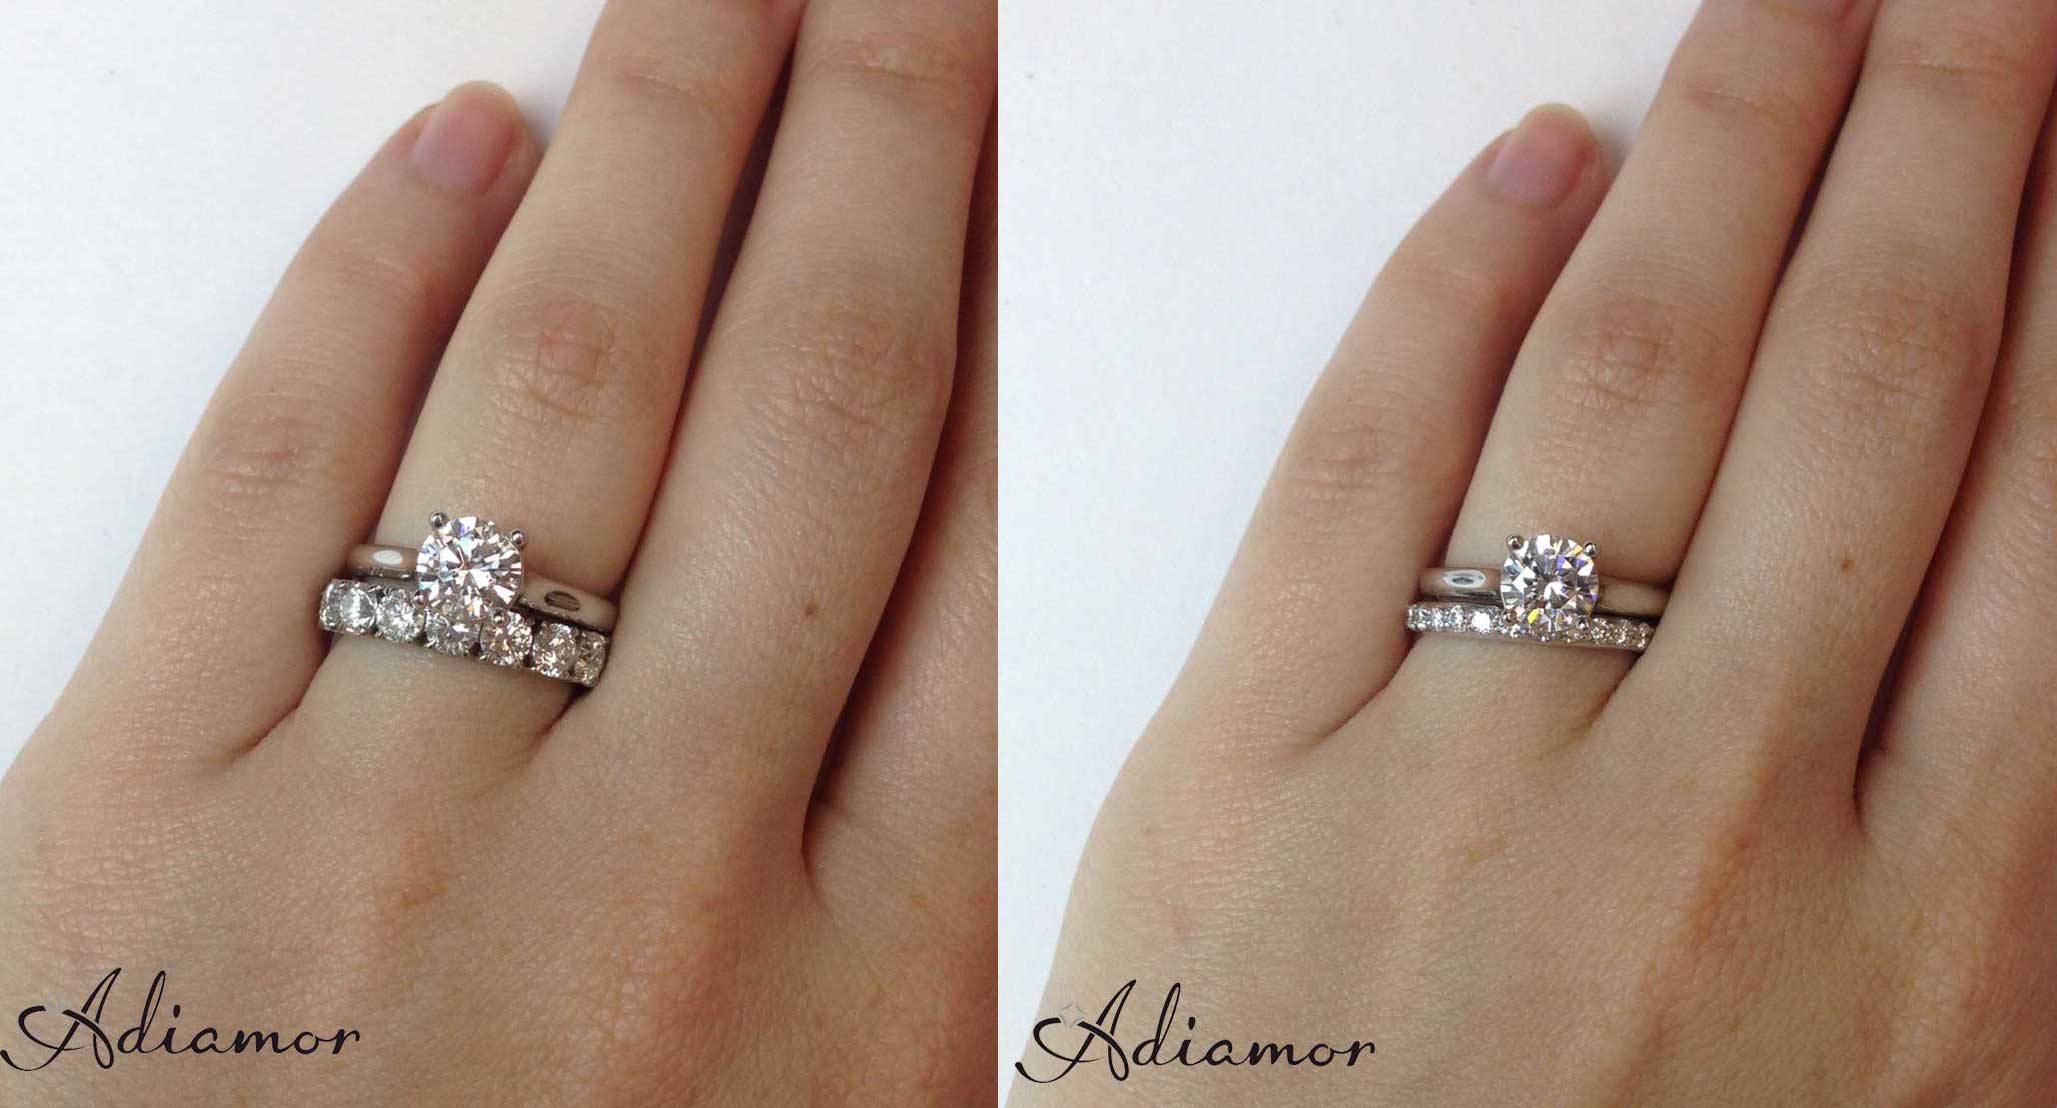 Are Mismatched Wedding Bands Good?